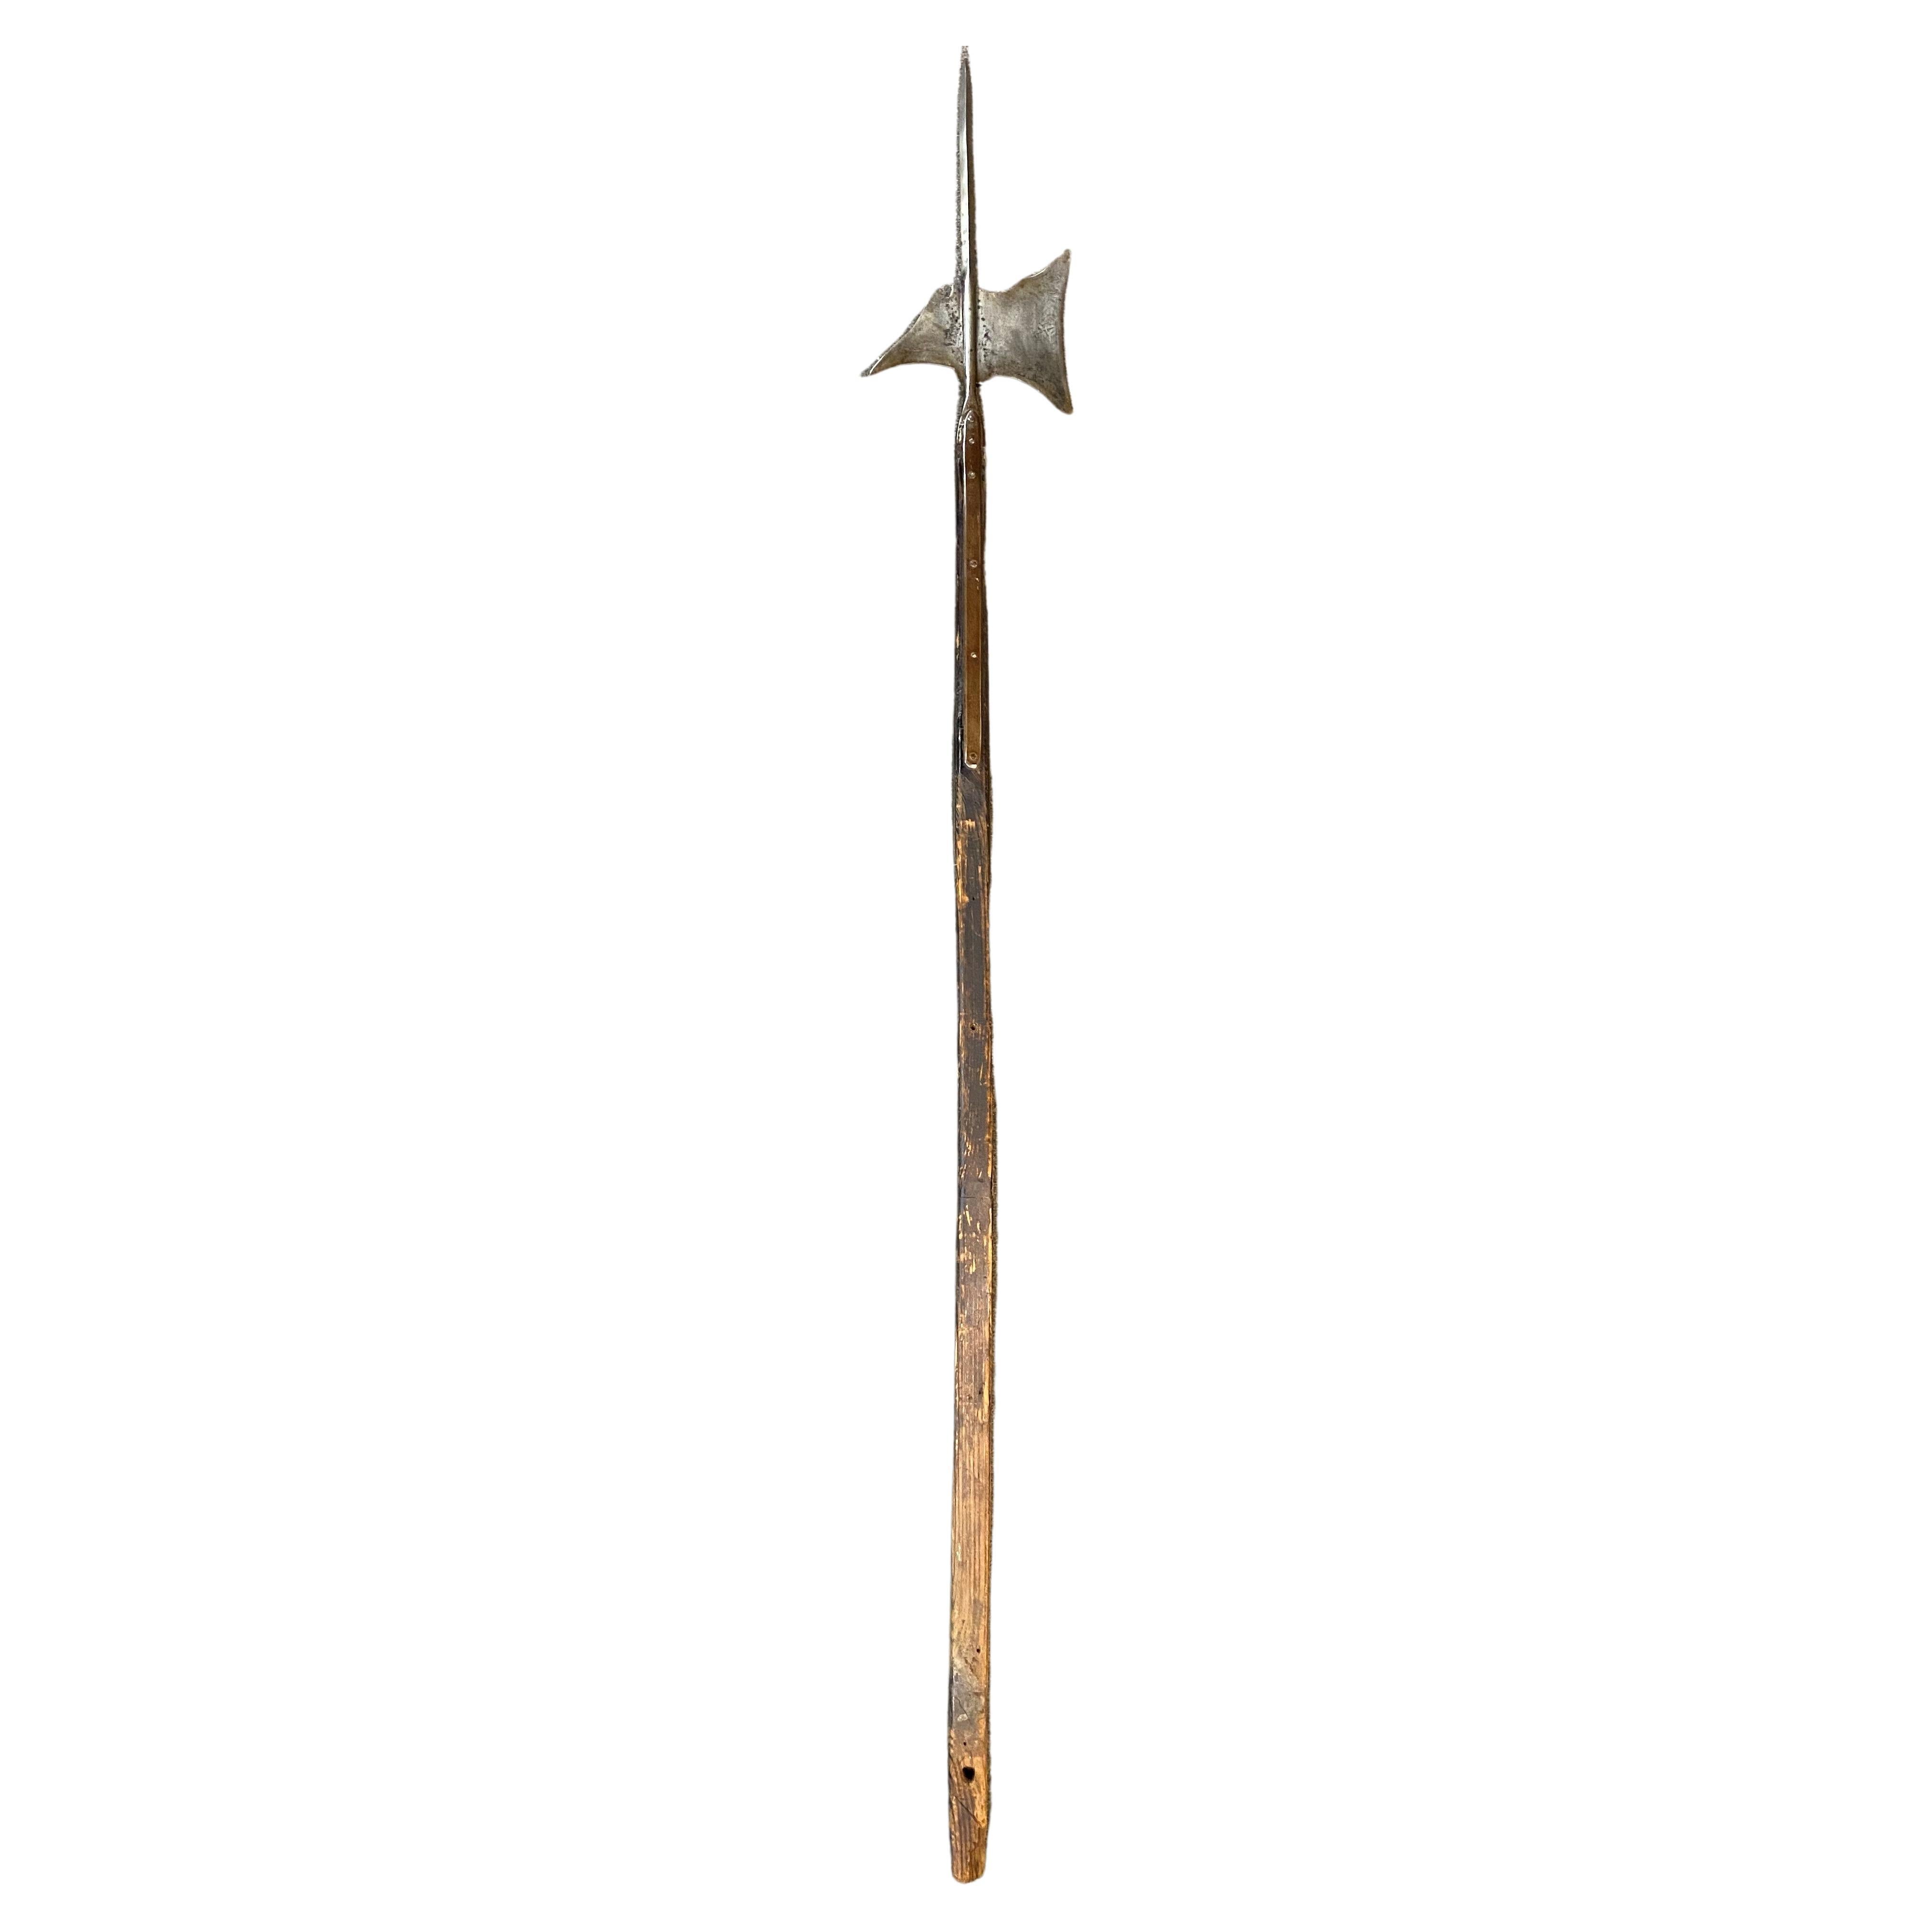 17th Century English Halberd with Pole Arm & Etched Blade